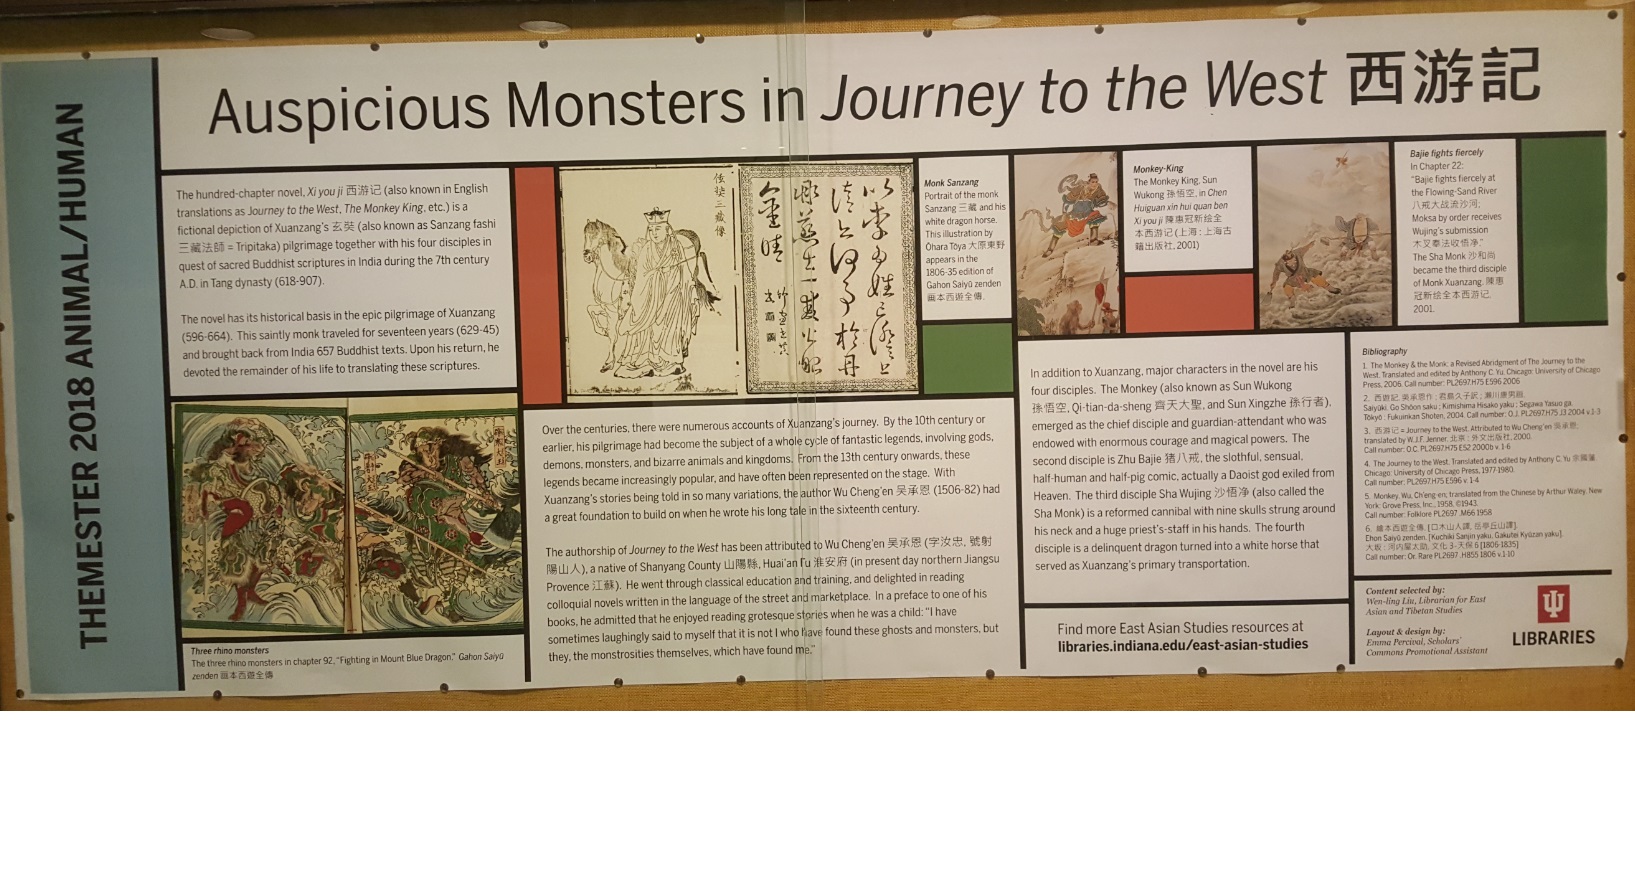 Auspicious monsters in Journey to the West